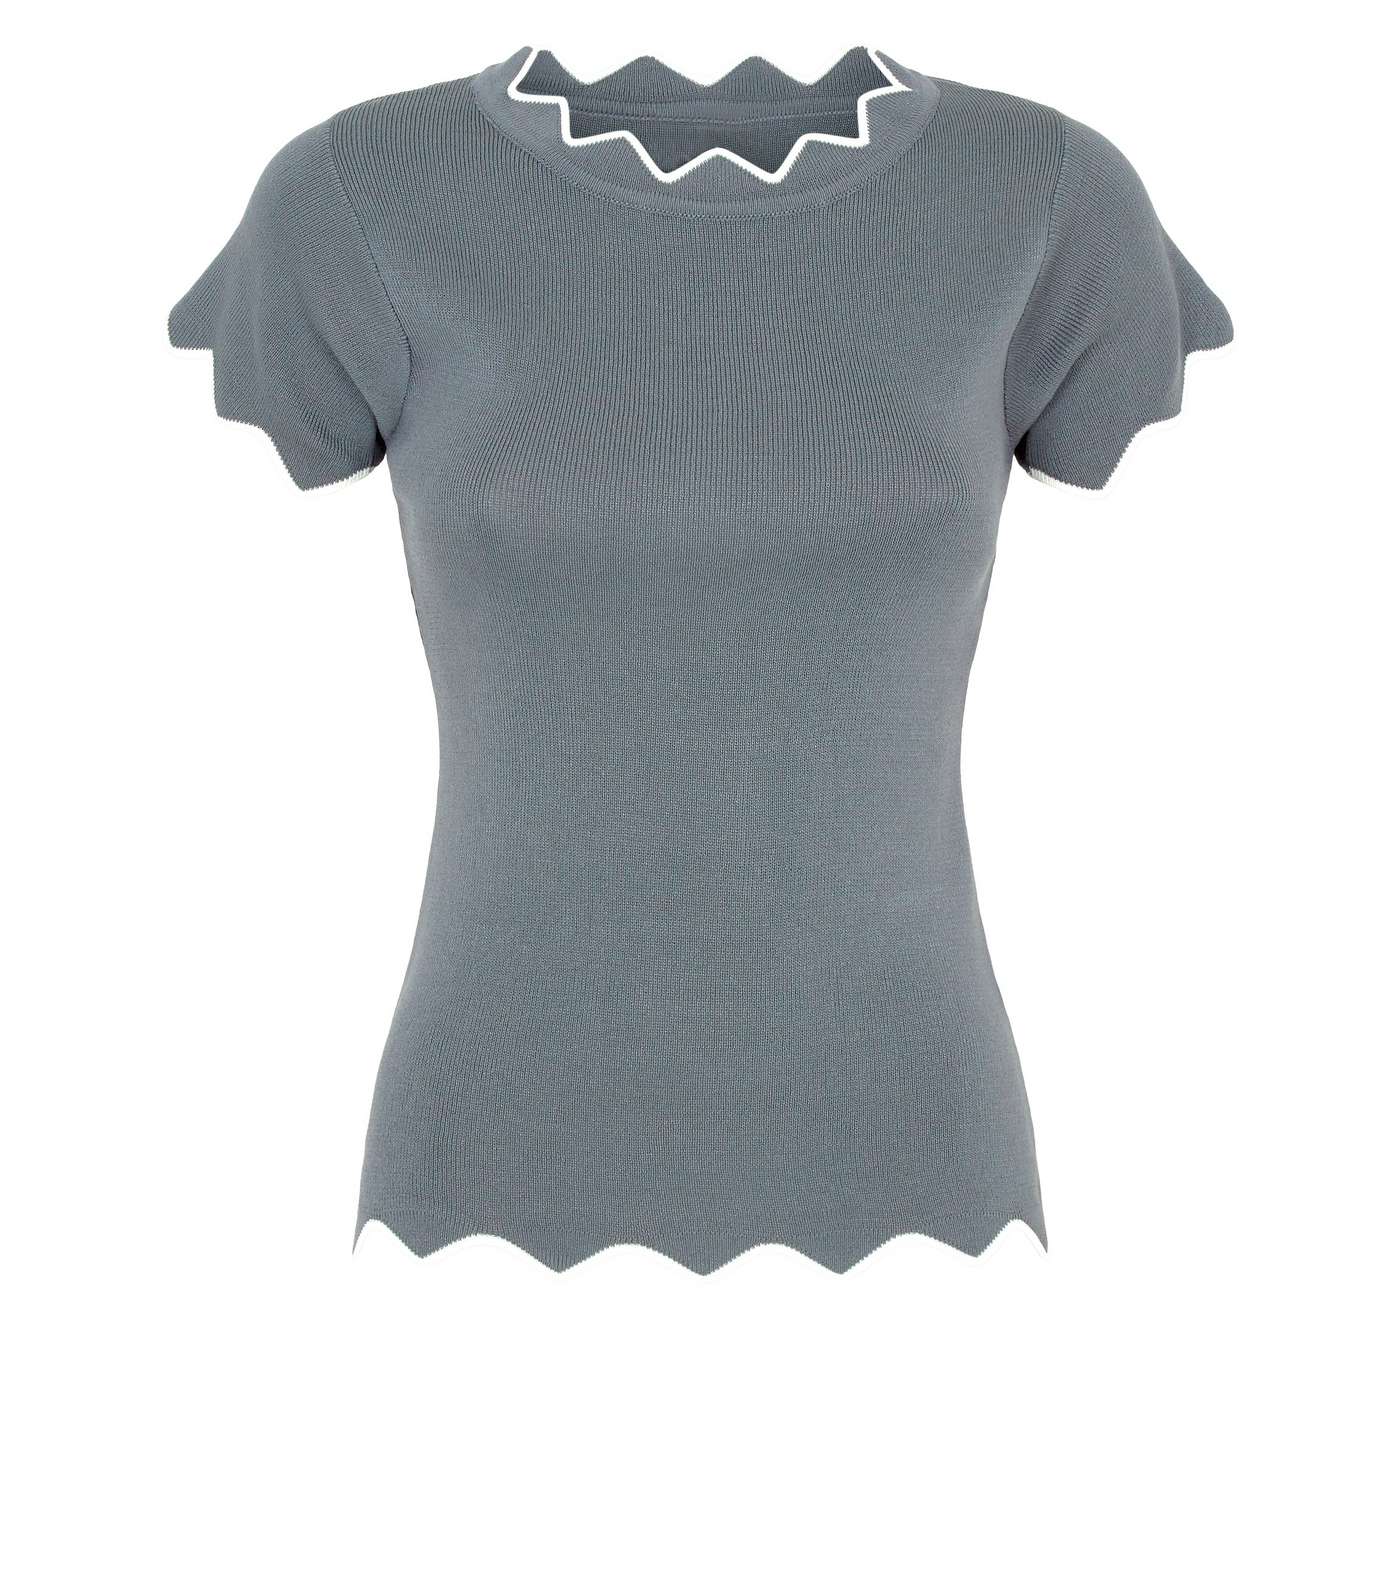 Apricot Grey Zig-Zag Trim Knitted Top Image 4